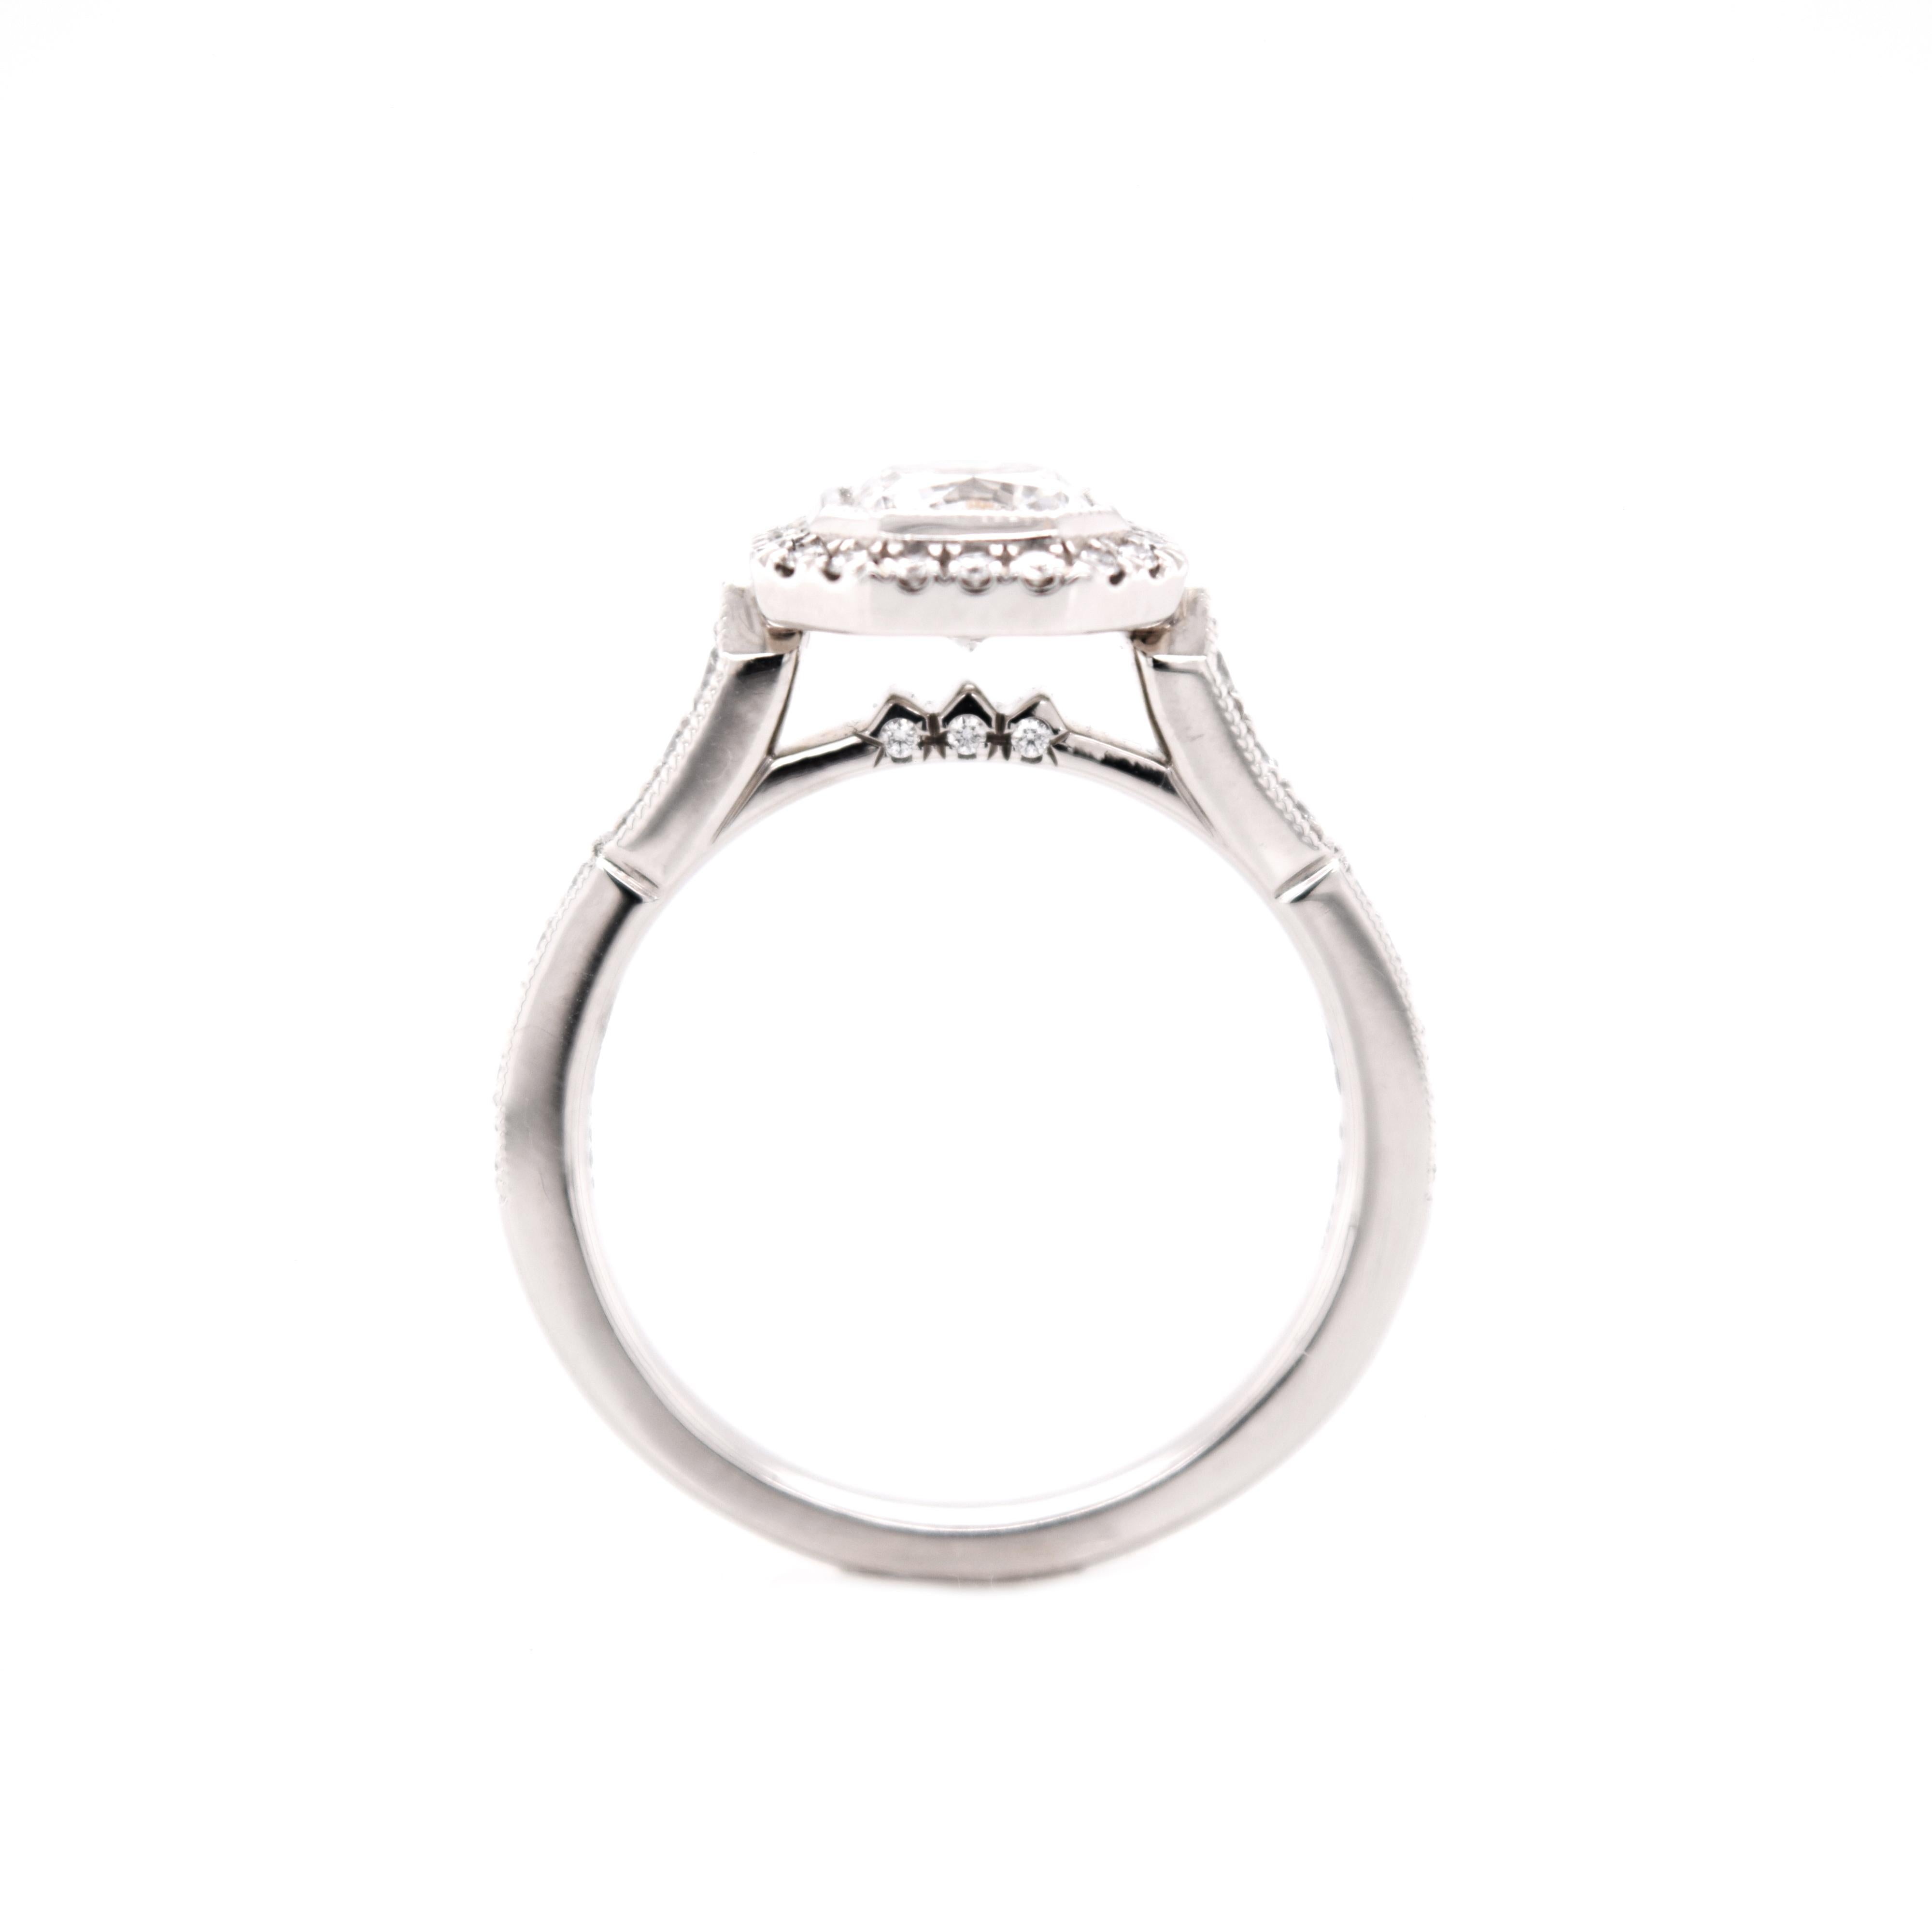 1.048 E color SI2 Dream [square radiant] diamond by Hearts on Fire set in this Art Deco Style ring surrounded by 36 Hearts on Fire Diamonds .27 Carat Total Weight G-H / VS-SI.
DRM is inscribed with # 12417. 
A diamond wedding band will fit perfectly